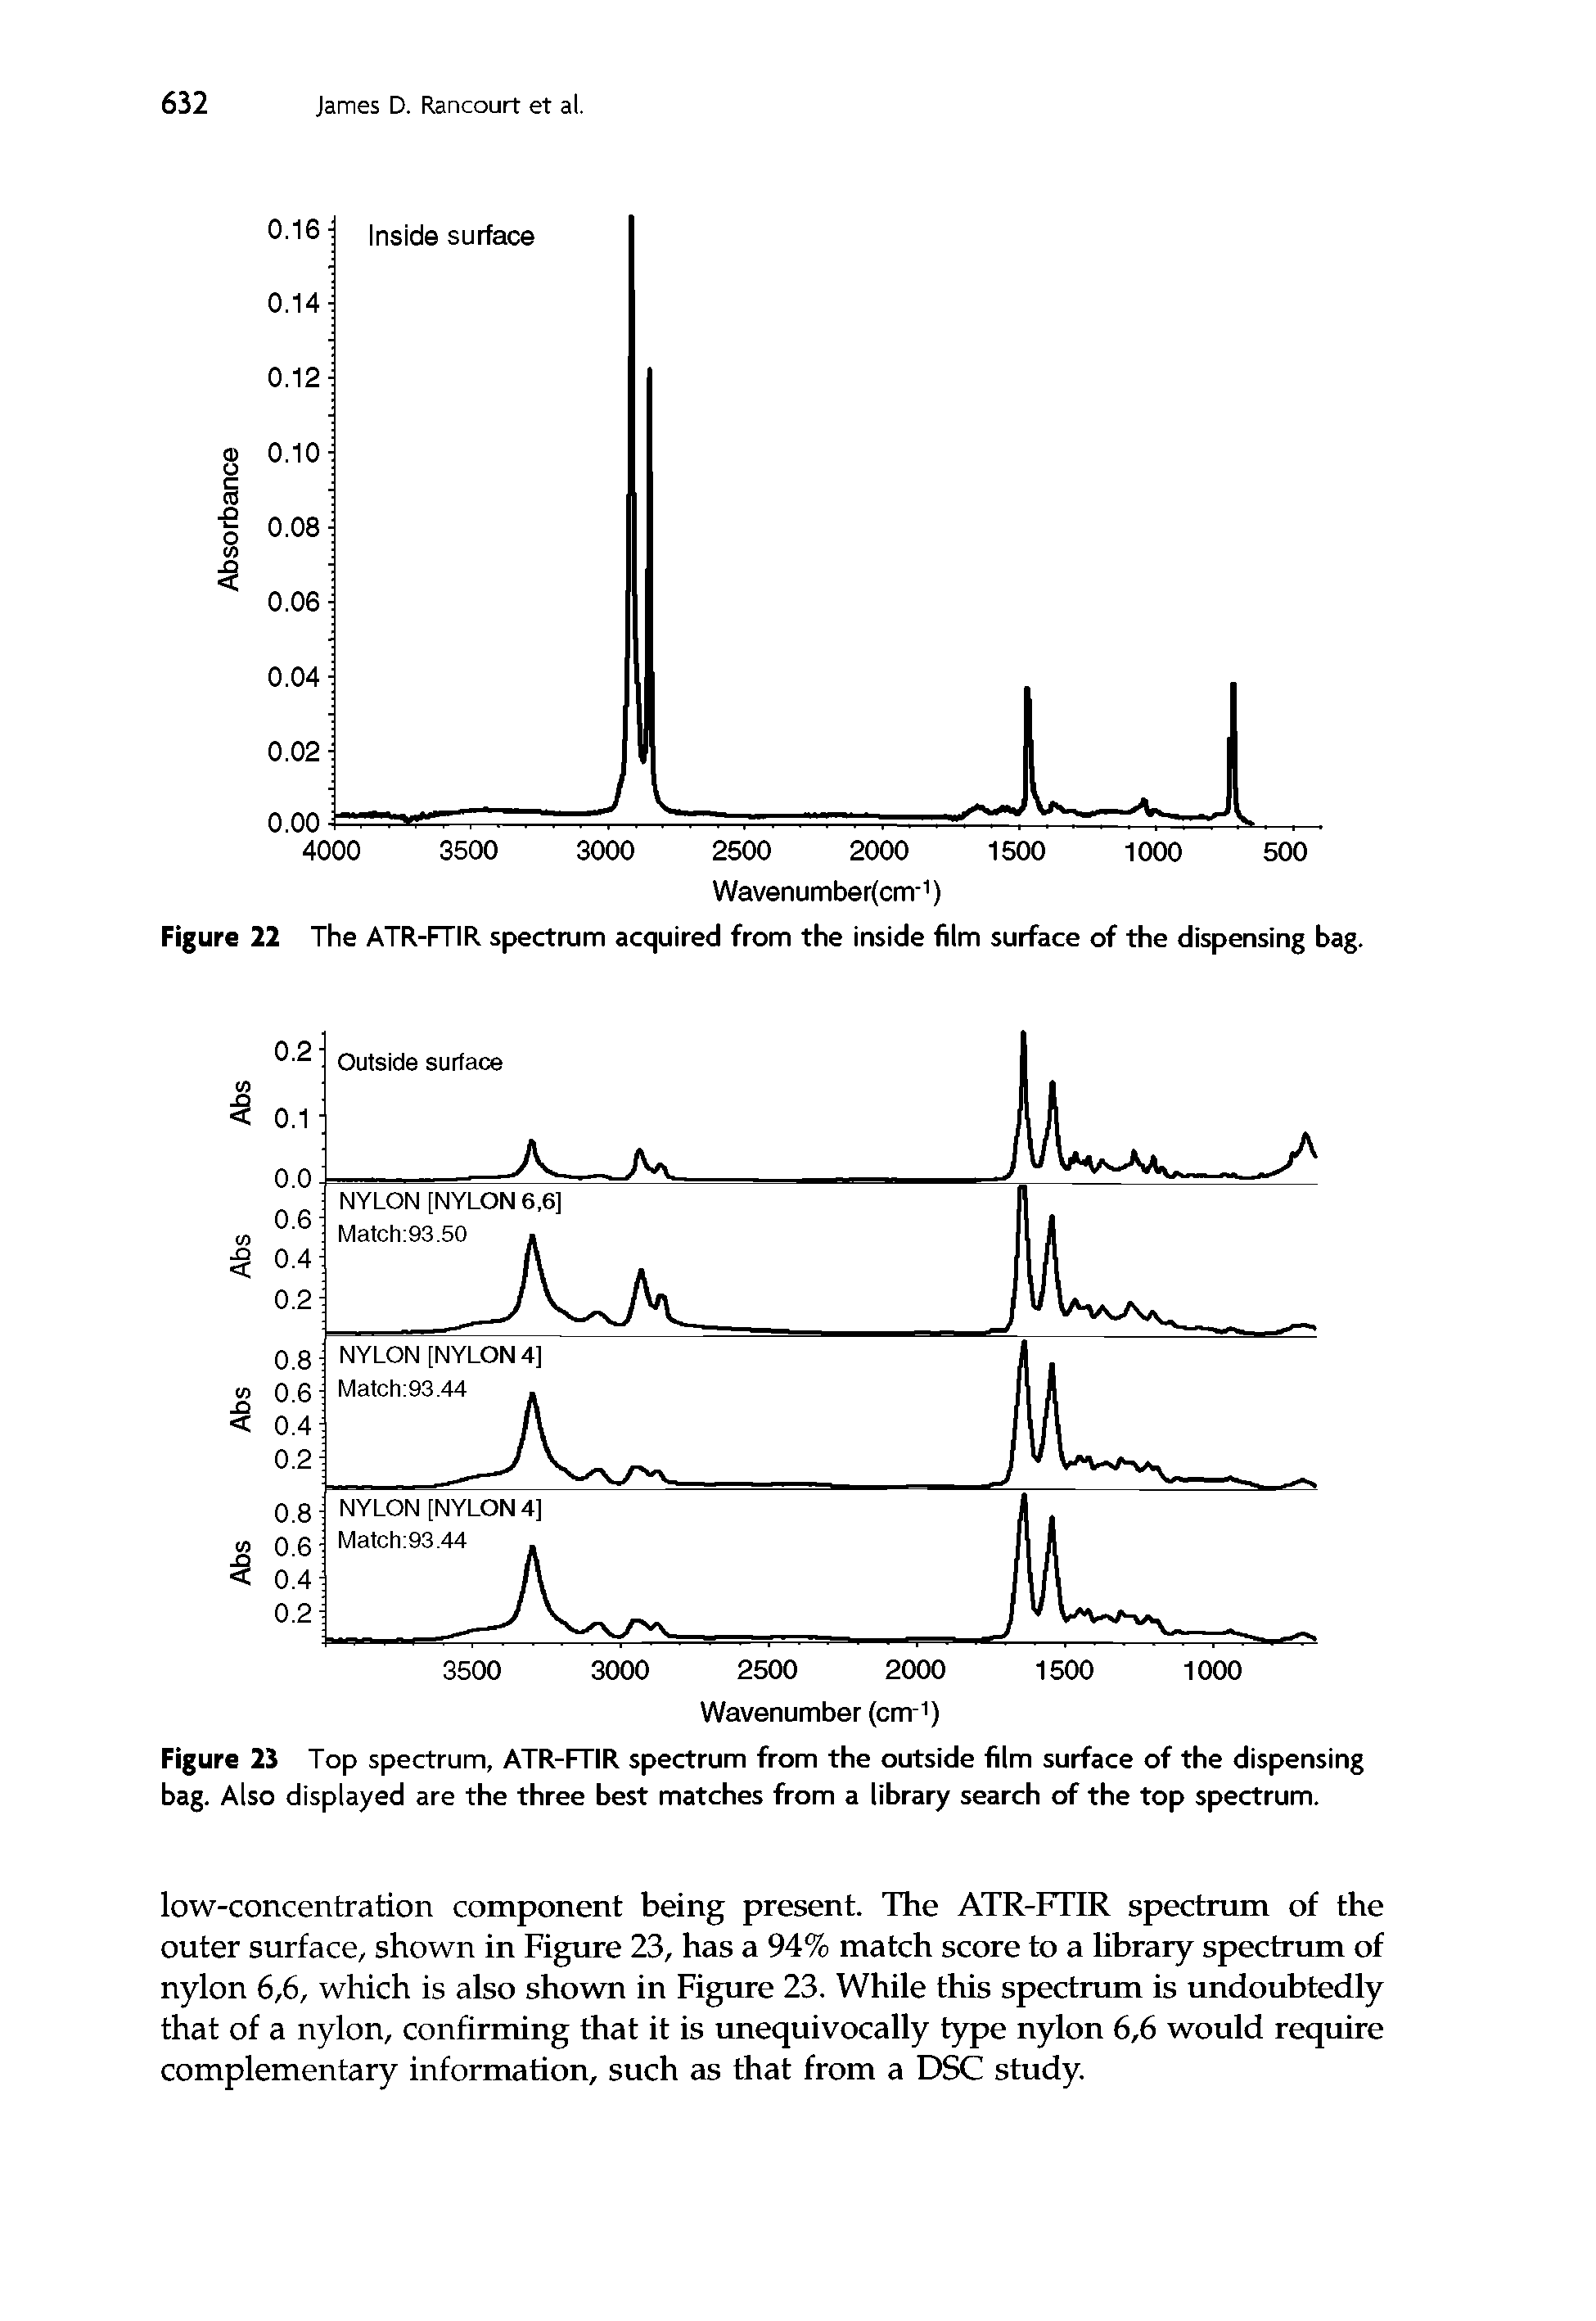 Figure 23 Top spectrum, ATR-FTIR spectrum from the outside film surface of the dispensing bag. Also displayed are the three best matches from a library search of the top spectrum.